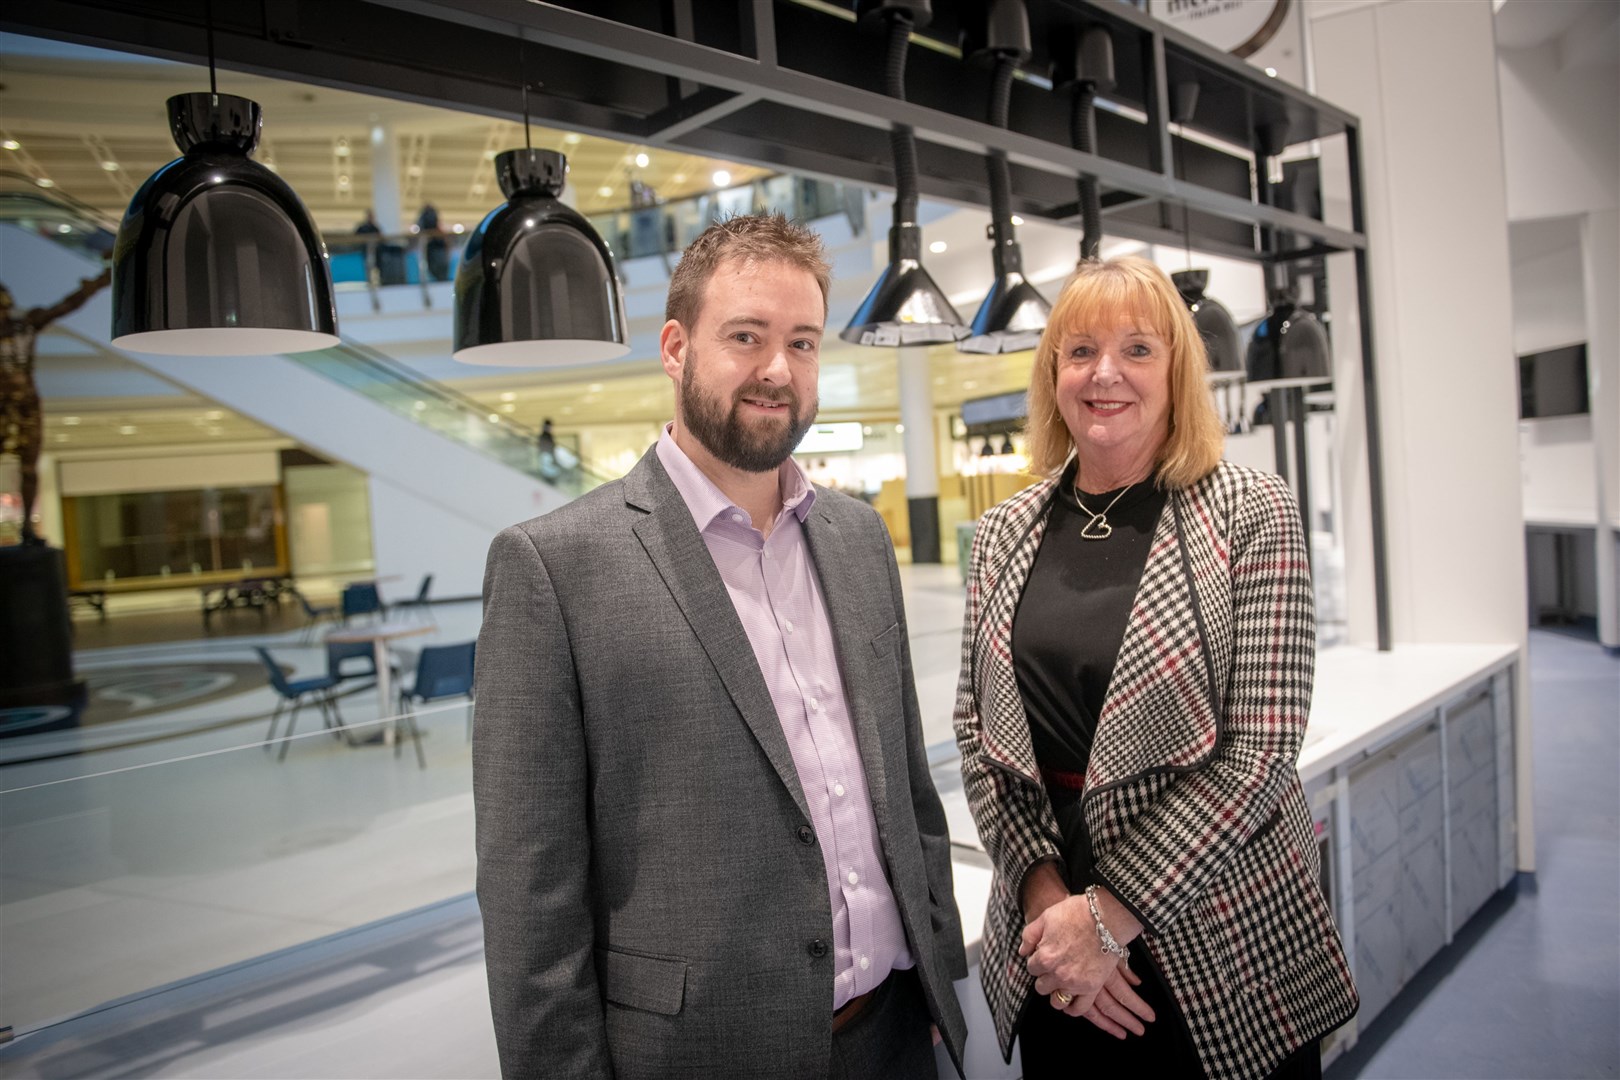 Chris Kershaw takes a look at the centre's new food court with outgoing manager Jackie Cuddy who retires later this month. Picture: Callum Mackay.